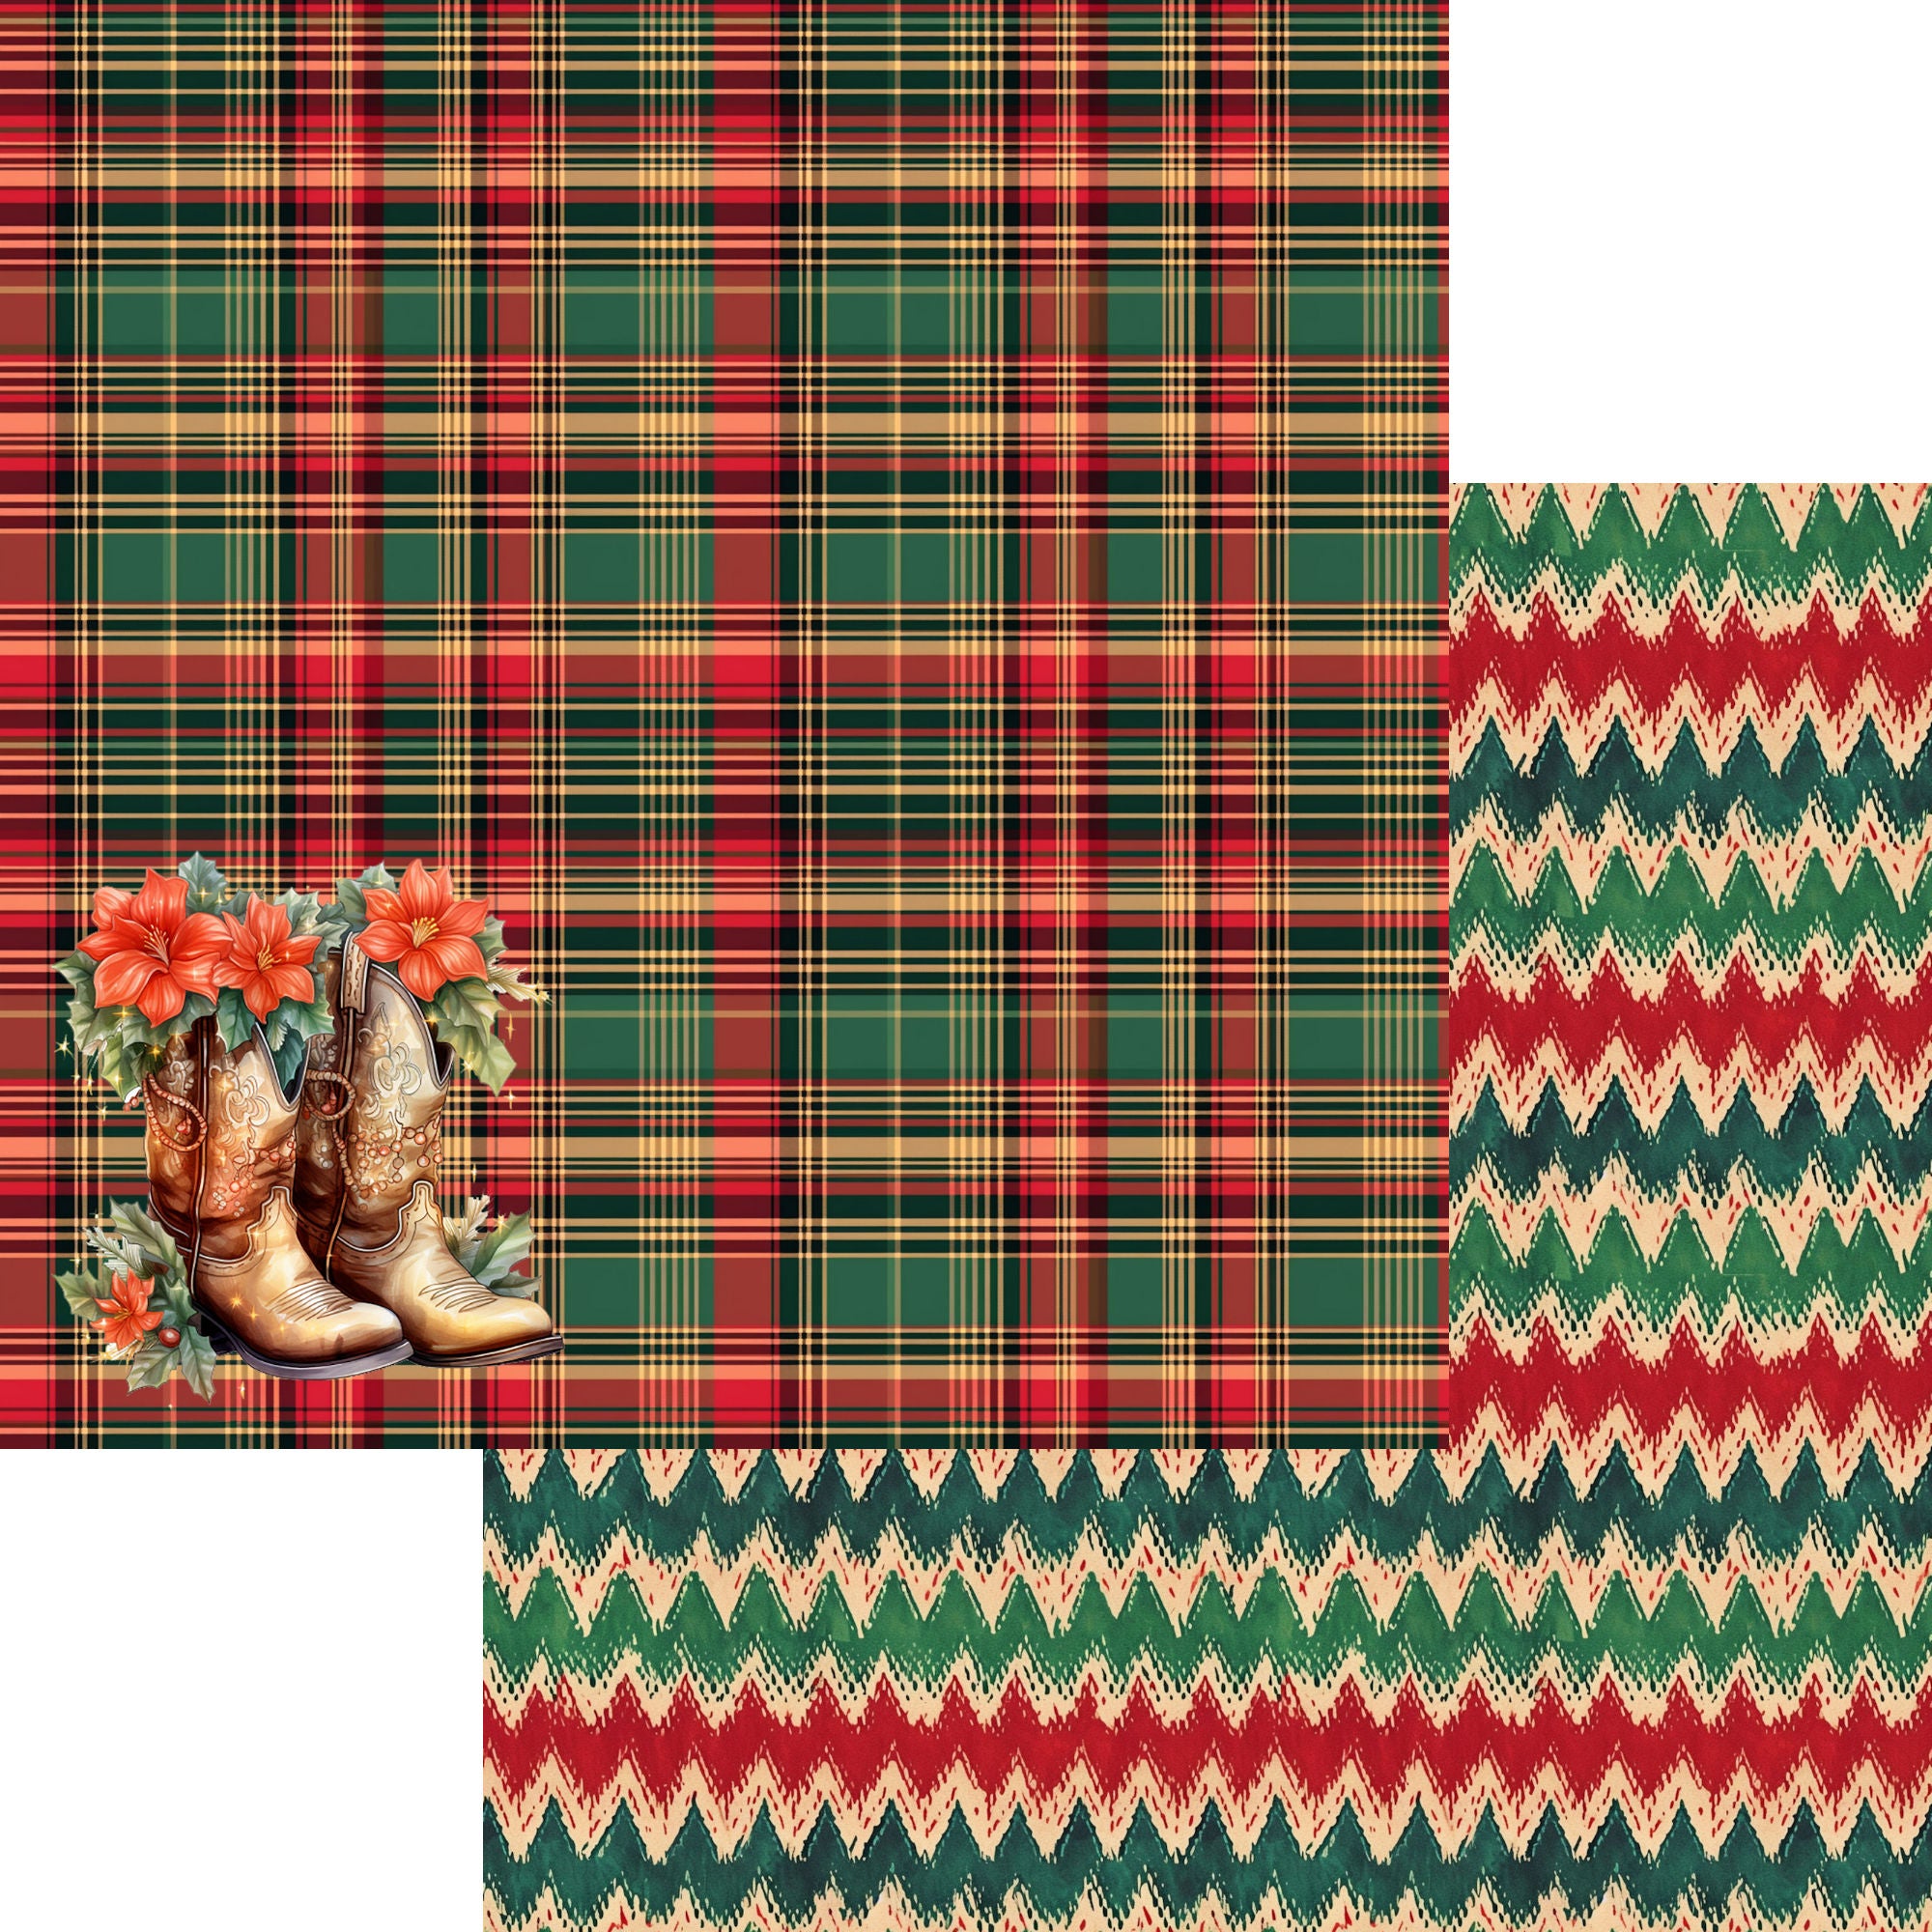 Cowboy Christmas Collection Christmas Cowboy Boots 12 x 12 Double-Sided Scrapbook Paper by SSC Designs